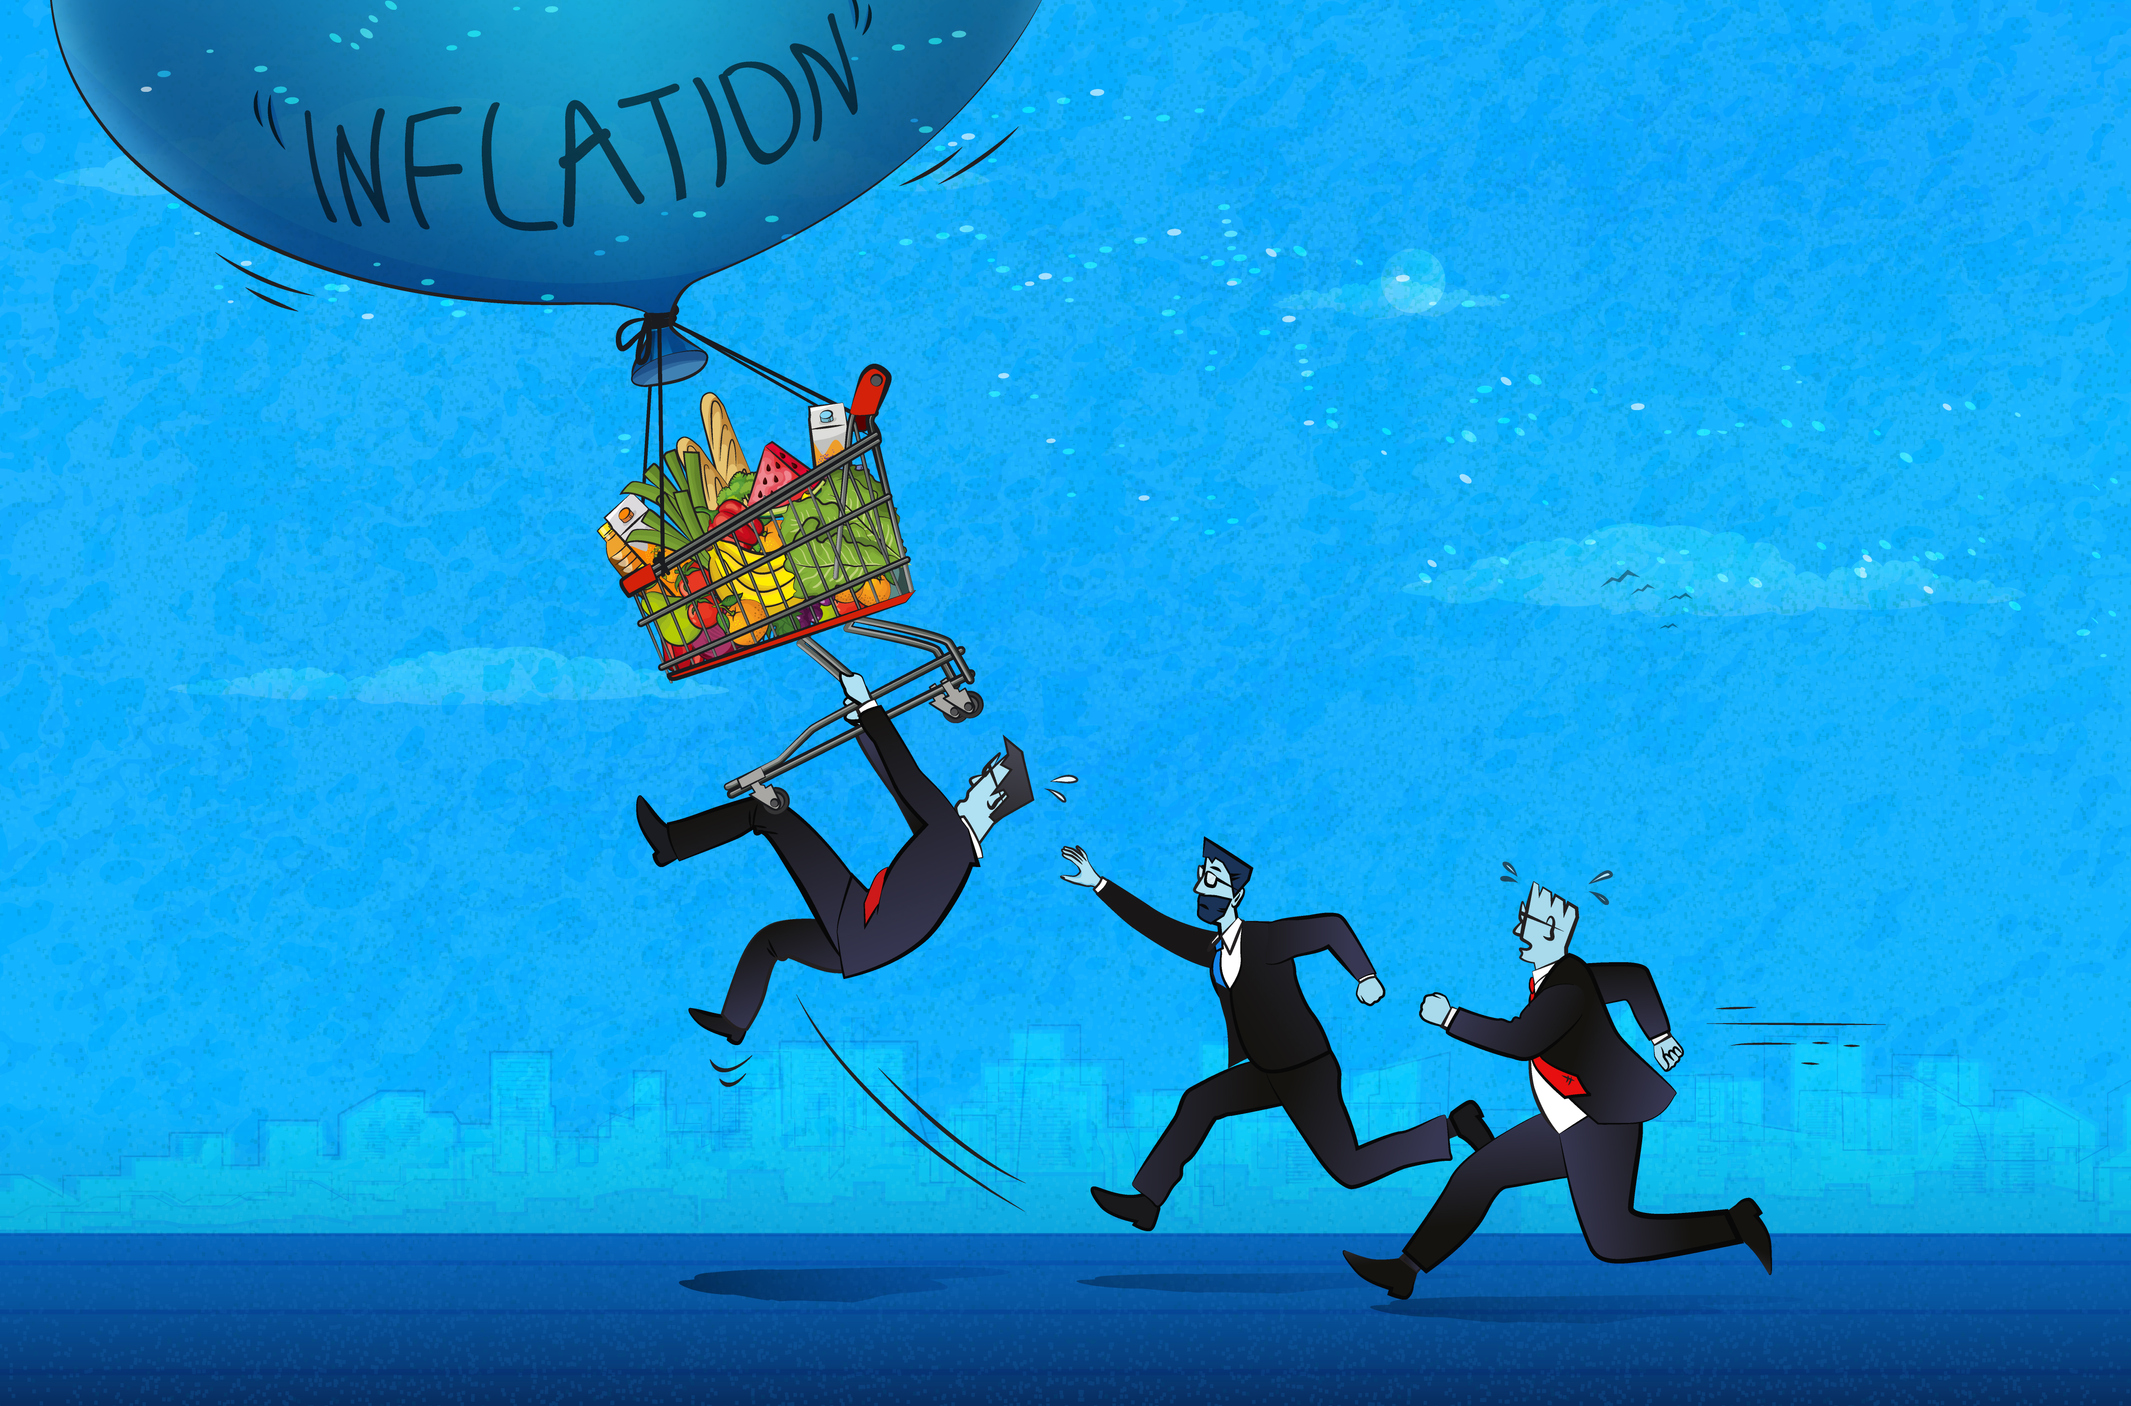 You Can’t Stop Inflation, But You Can Prepare Accelerated Wealth